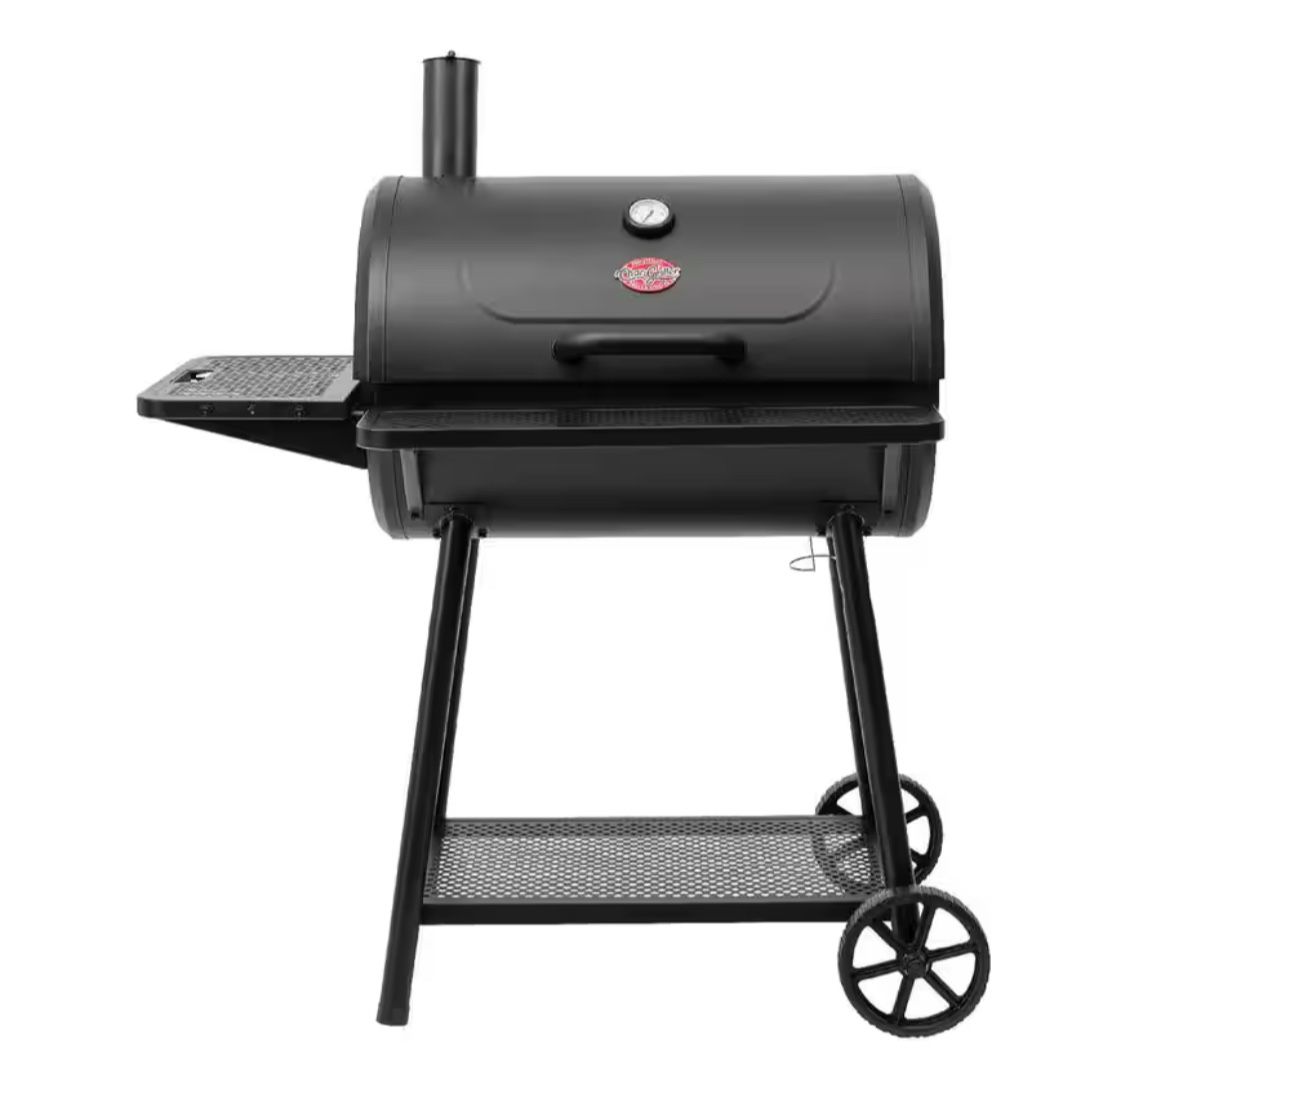 Blazer Charcoal Grill in Black